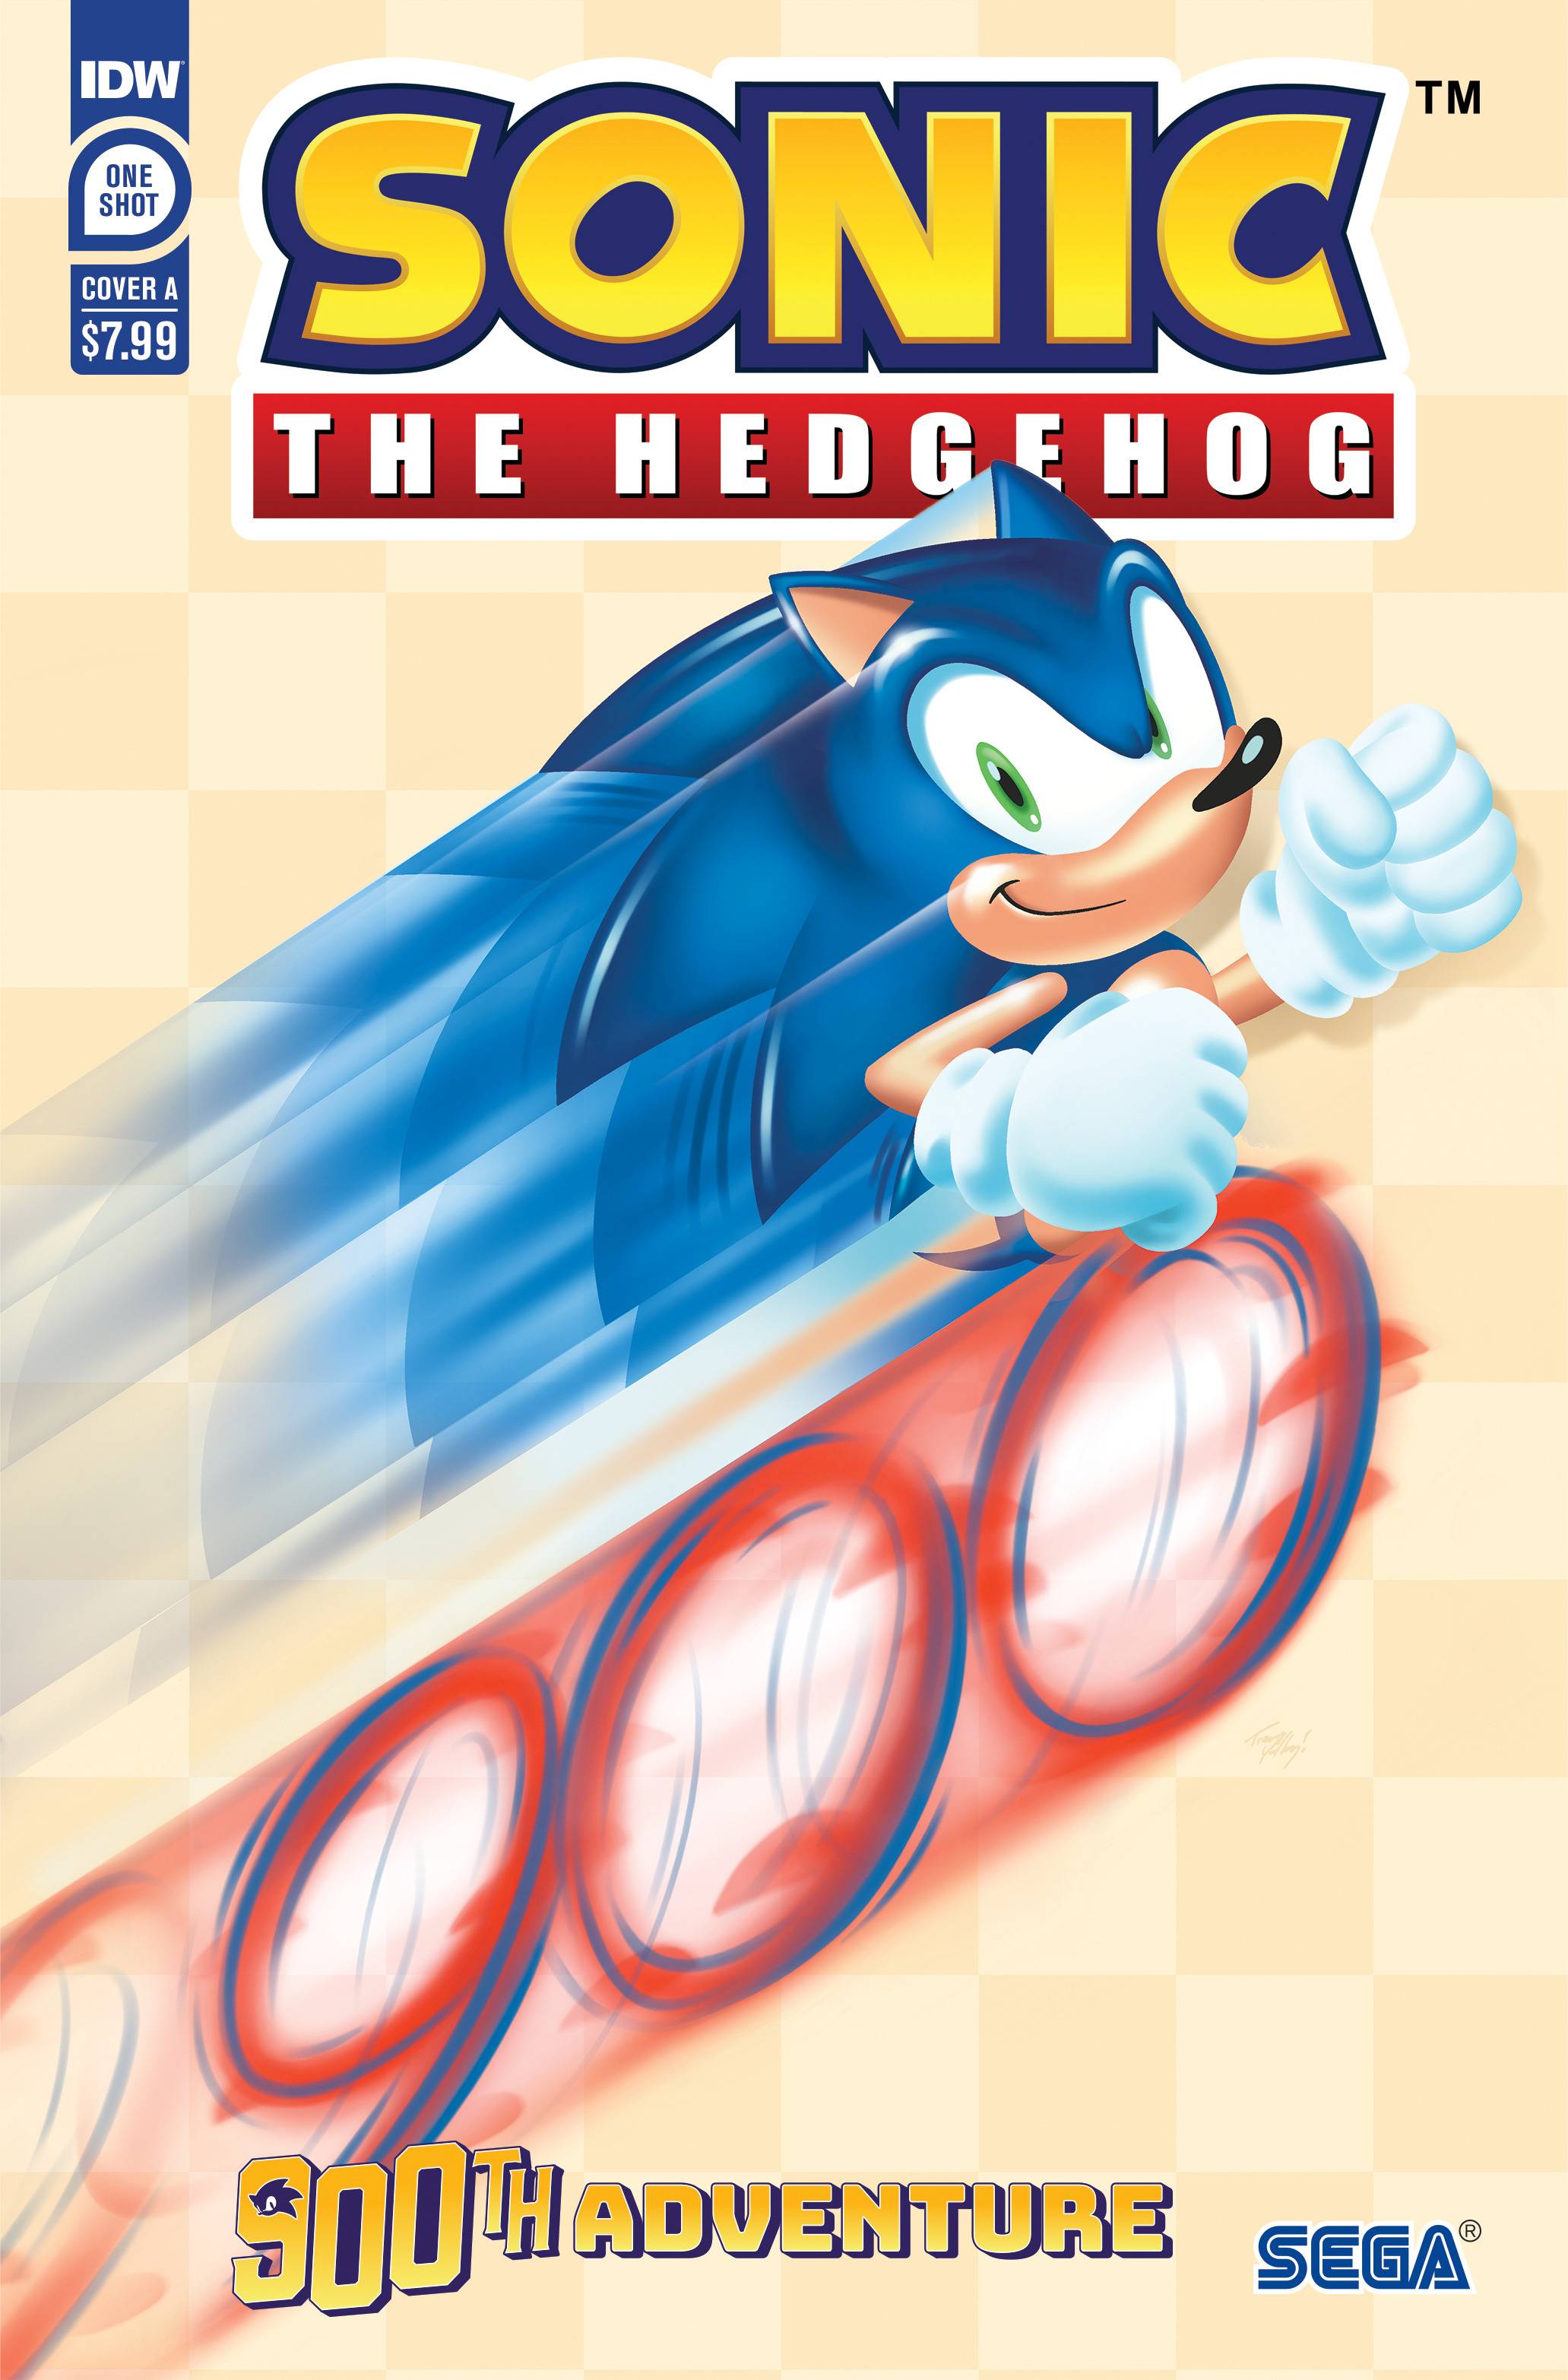 SONIC THE HEDGEHOGS 900TH ADVENTURE